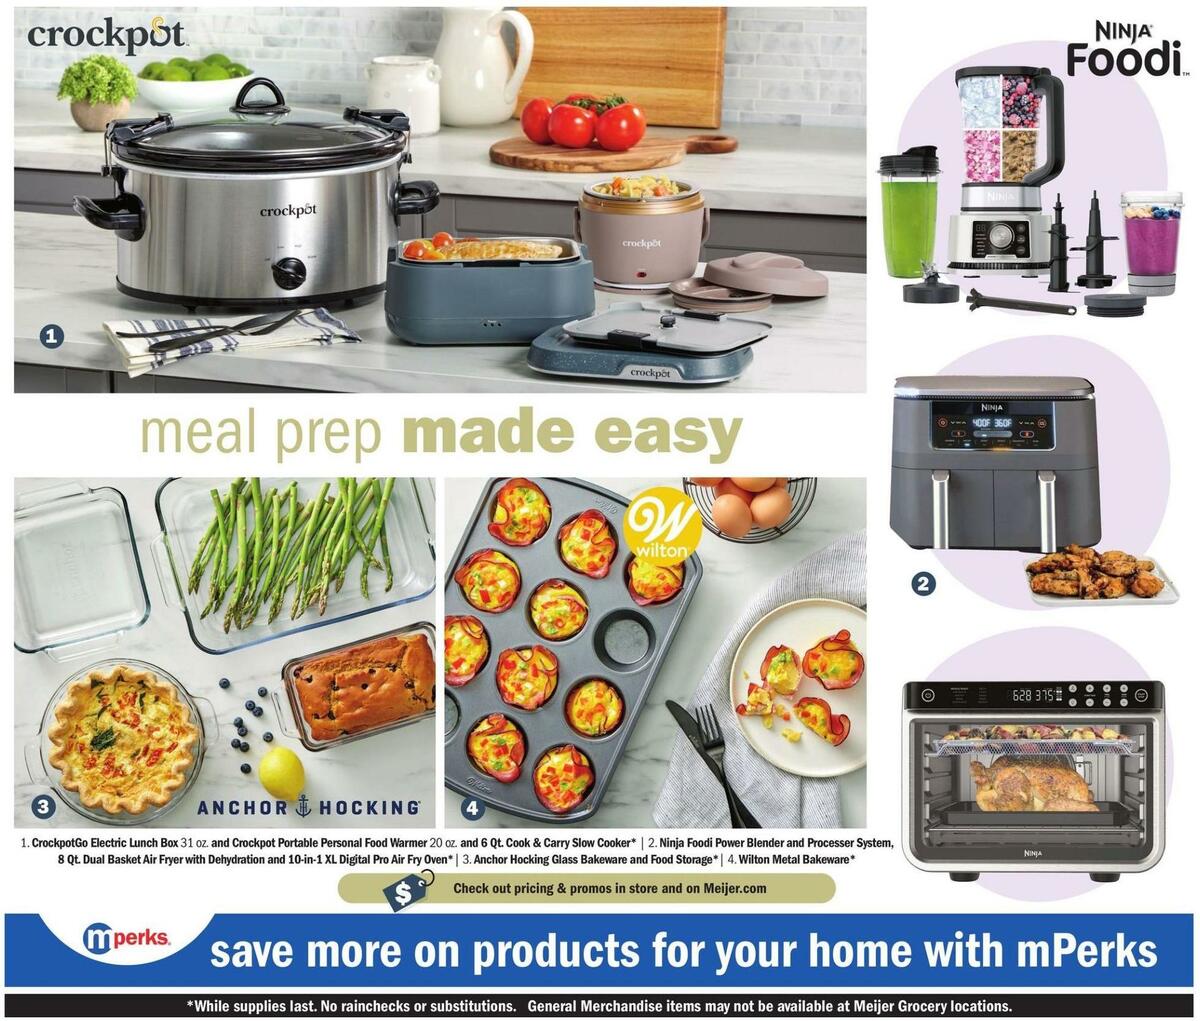 Meijer Home Spring 2023 Weekly Ad from February 26